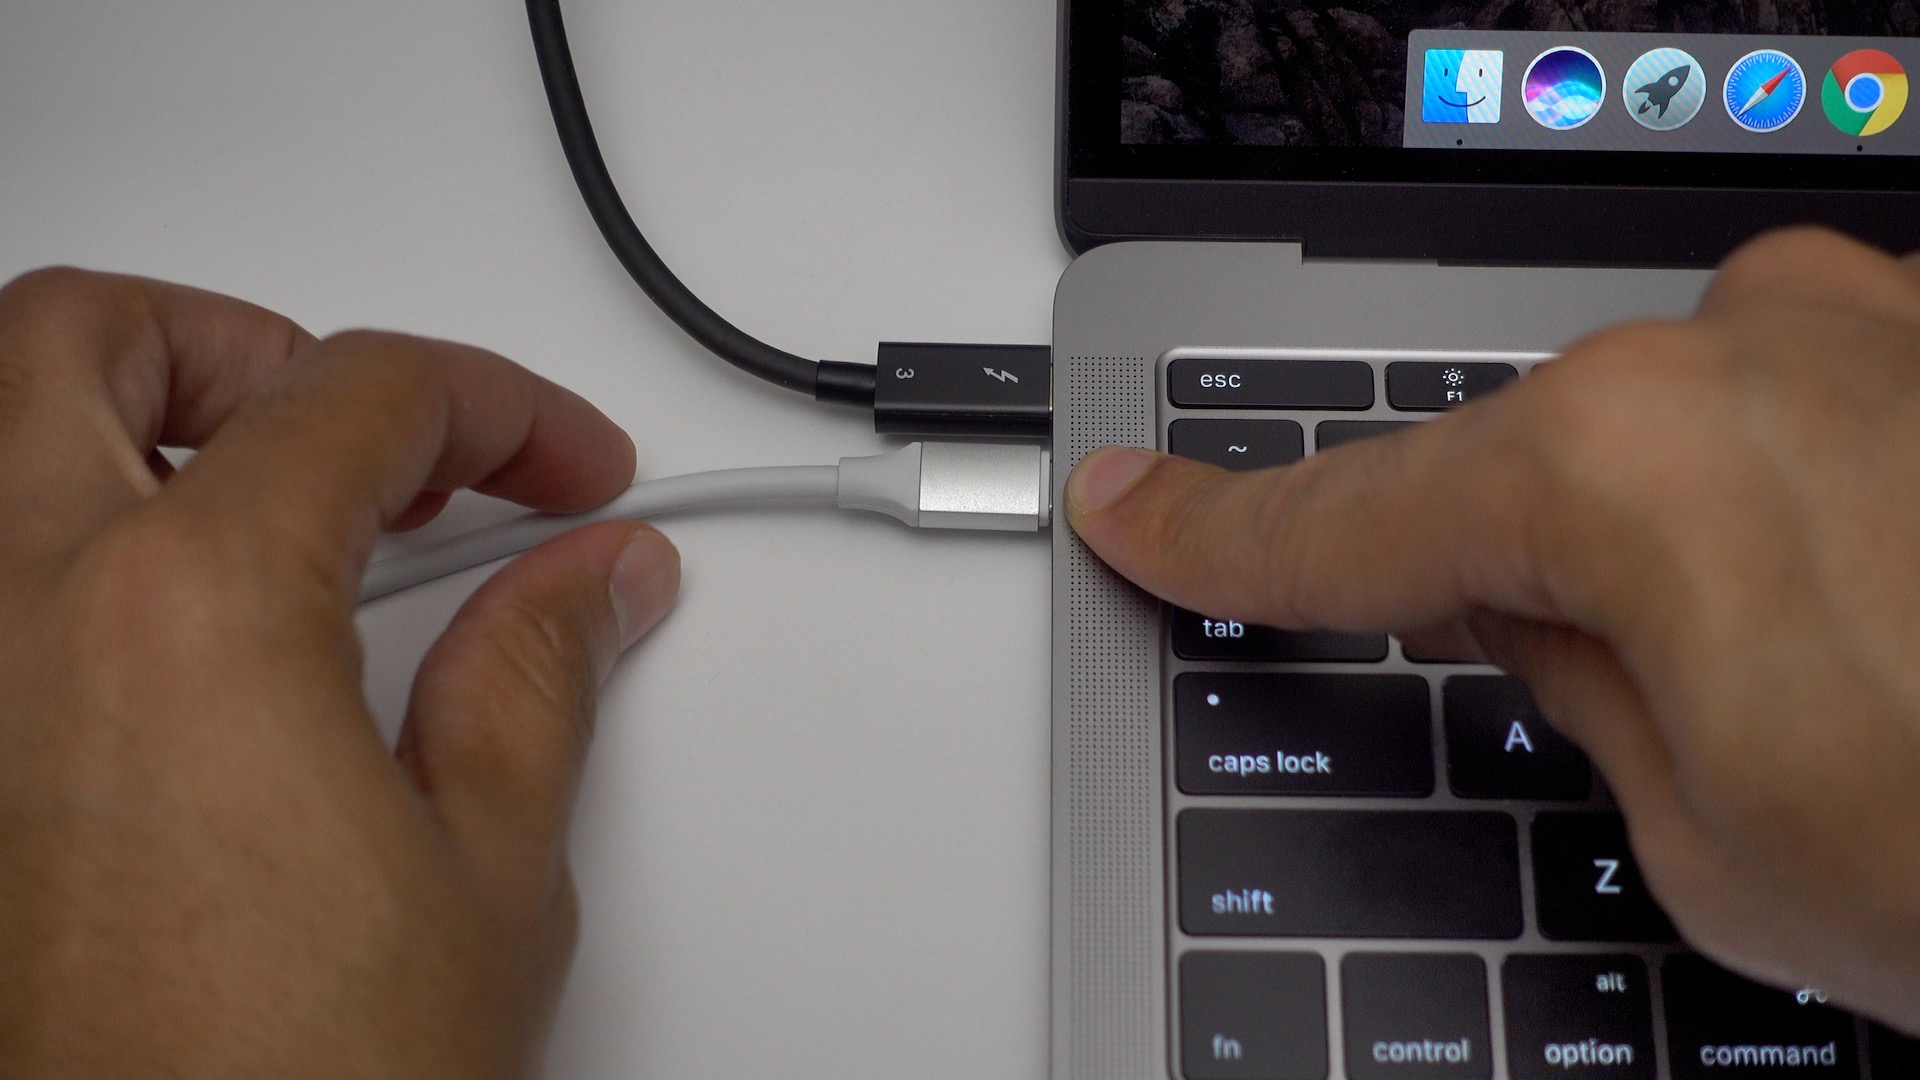 macbook pro usb c charger review third party